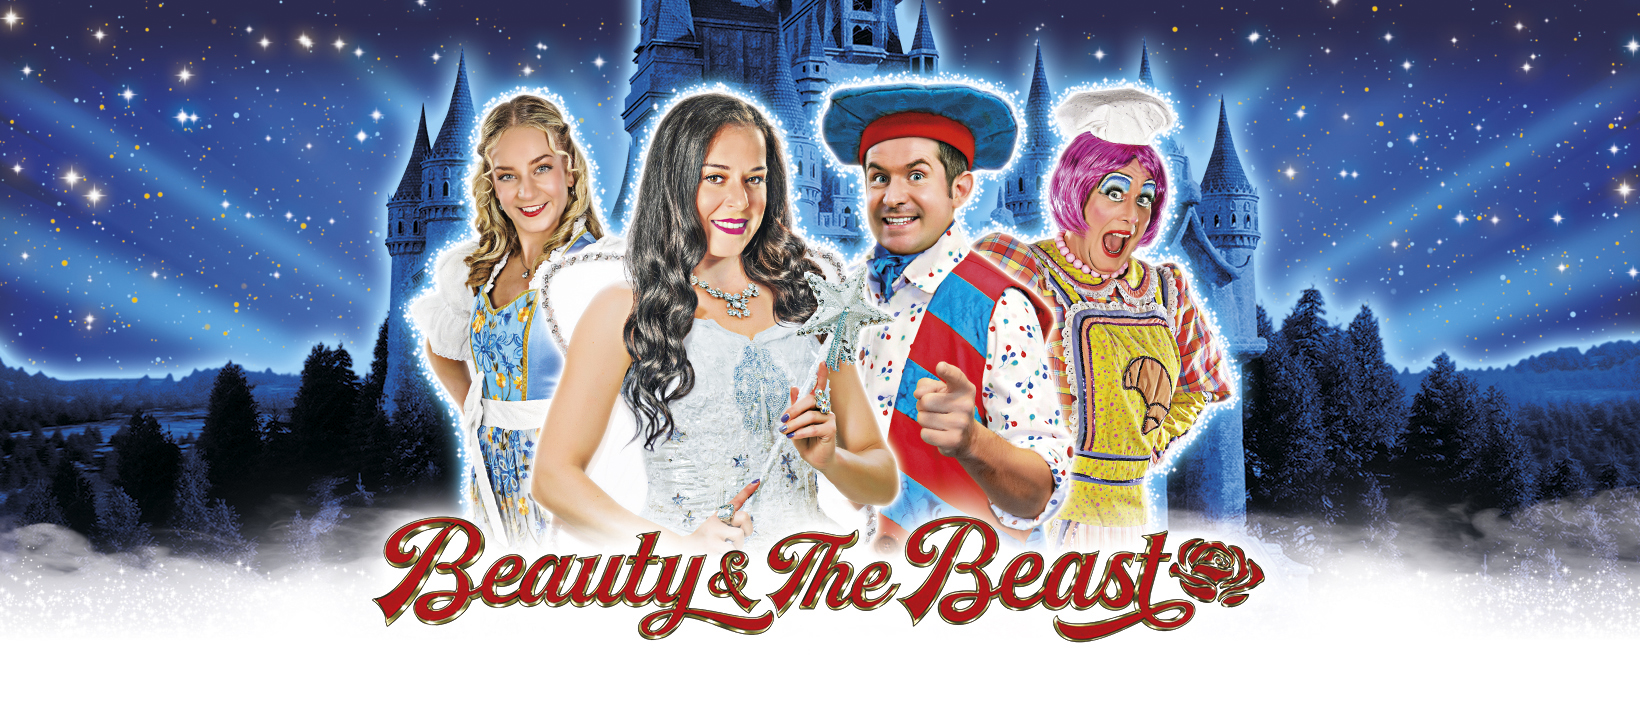 Beauty and the Beast full cast image